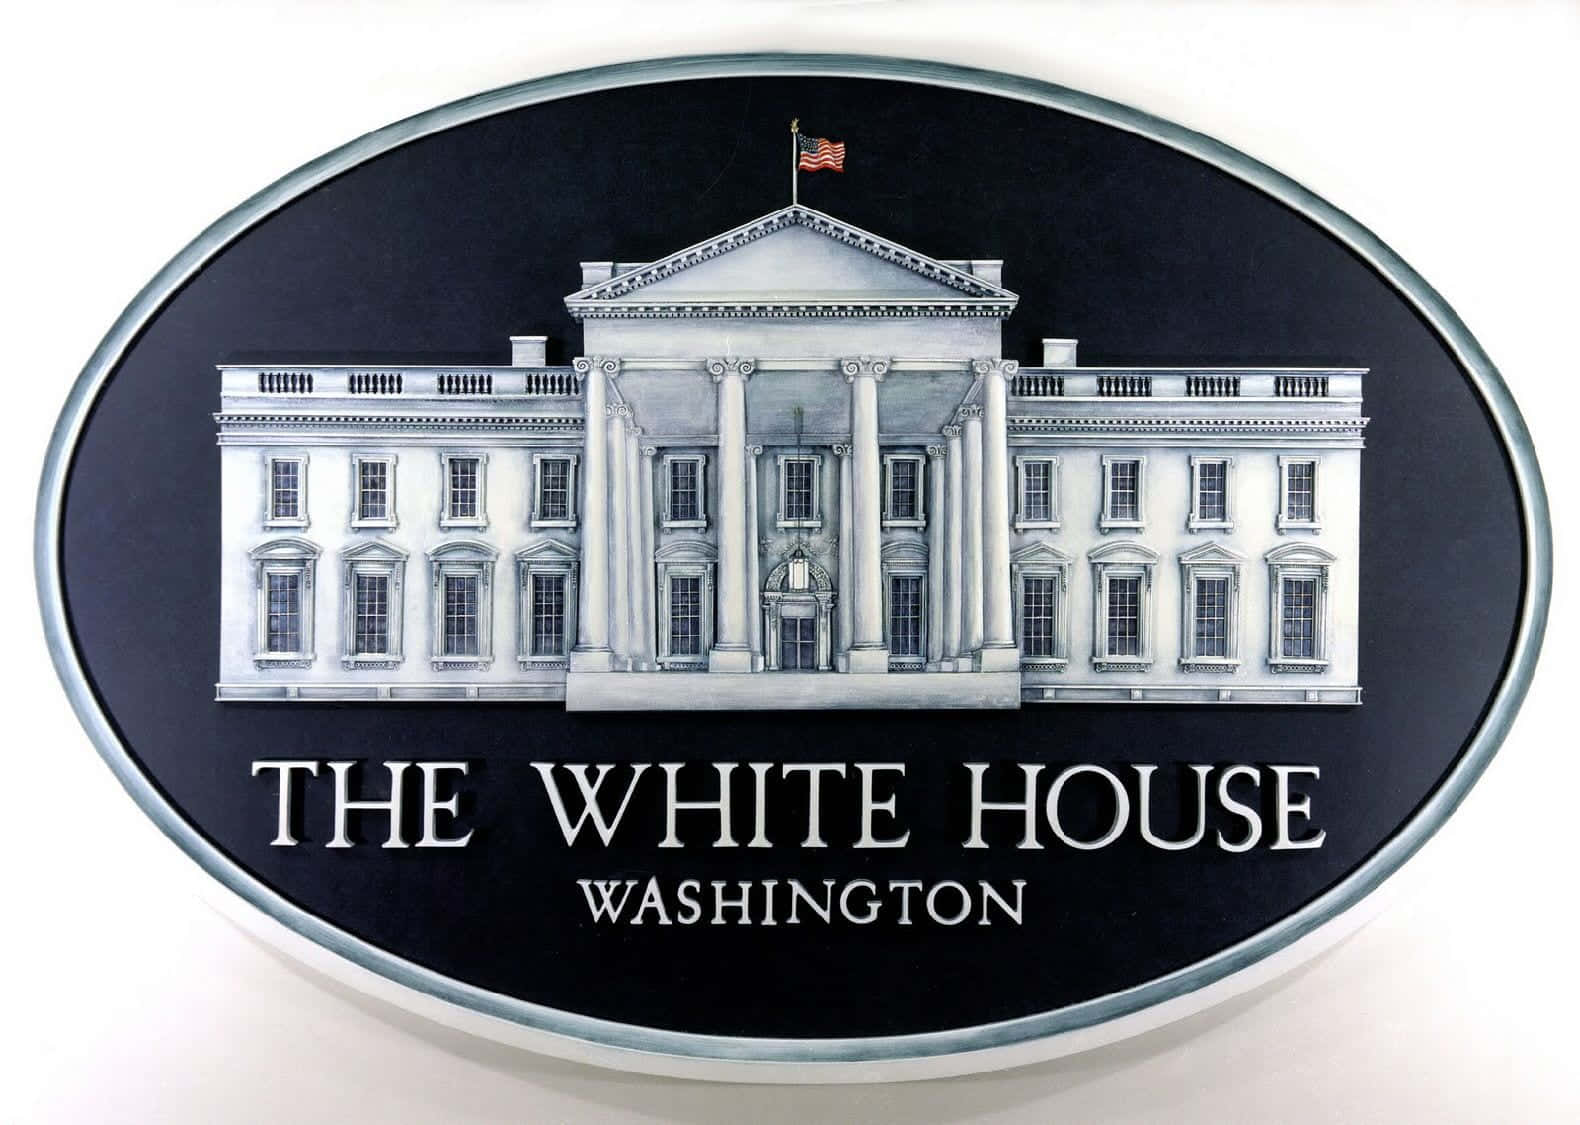 Home of the President of the United States